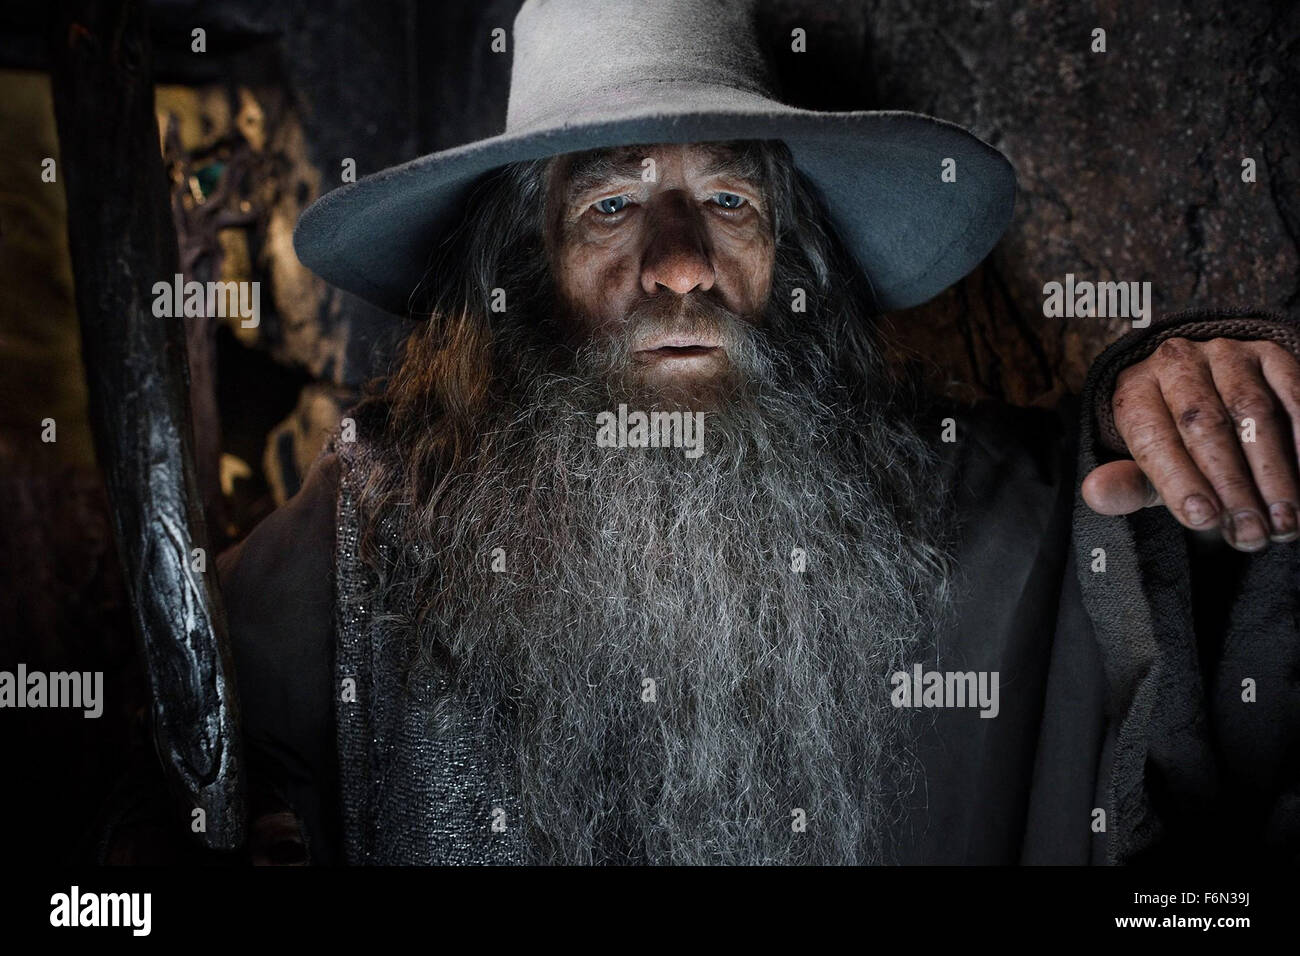 June 15, 2013 - No Merchandising. Editorial Use Only. No Book Cover Usage....The Hobbit: the Desolation of Smaug, Sir Ian McKellen..The Hobbit: The Desolation of Smaug - 2013. (Credit Image: c Moviestore/Rex Features) Stock Photo